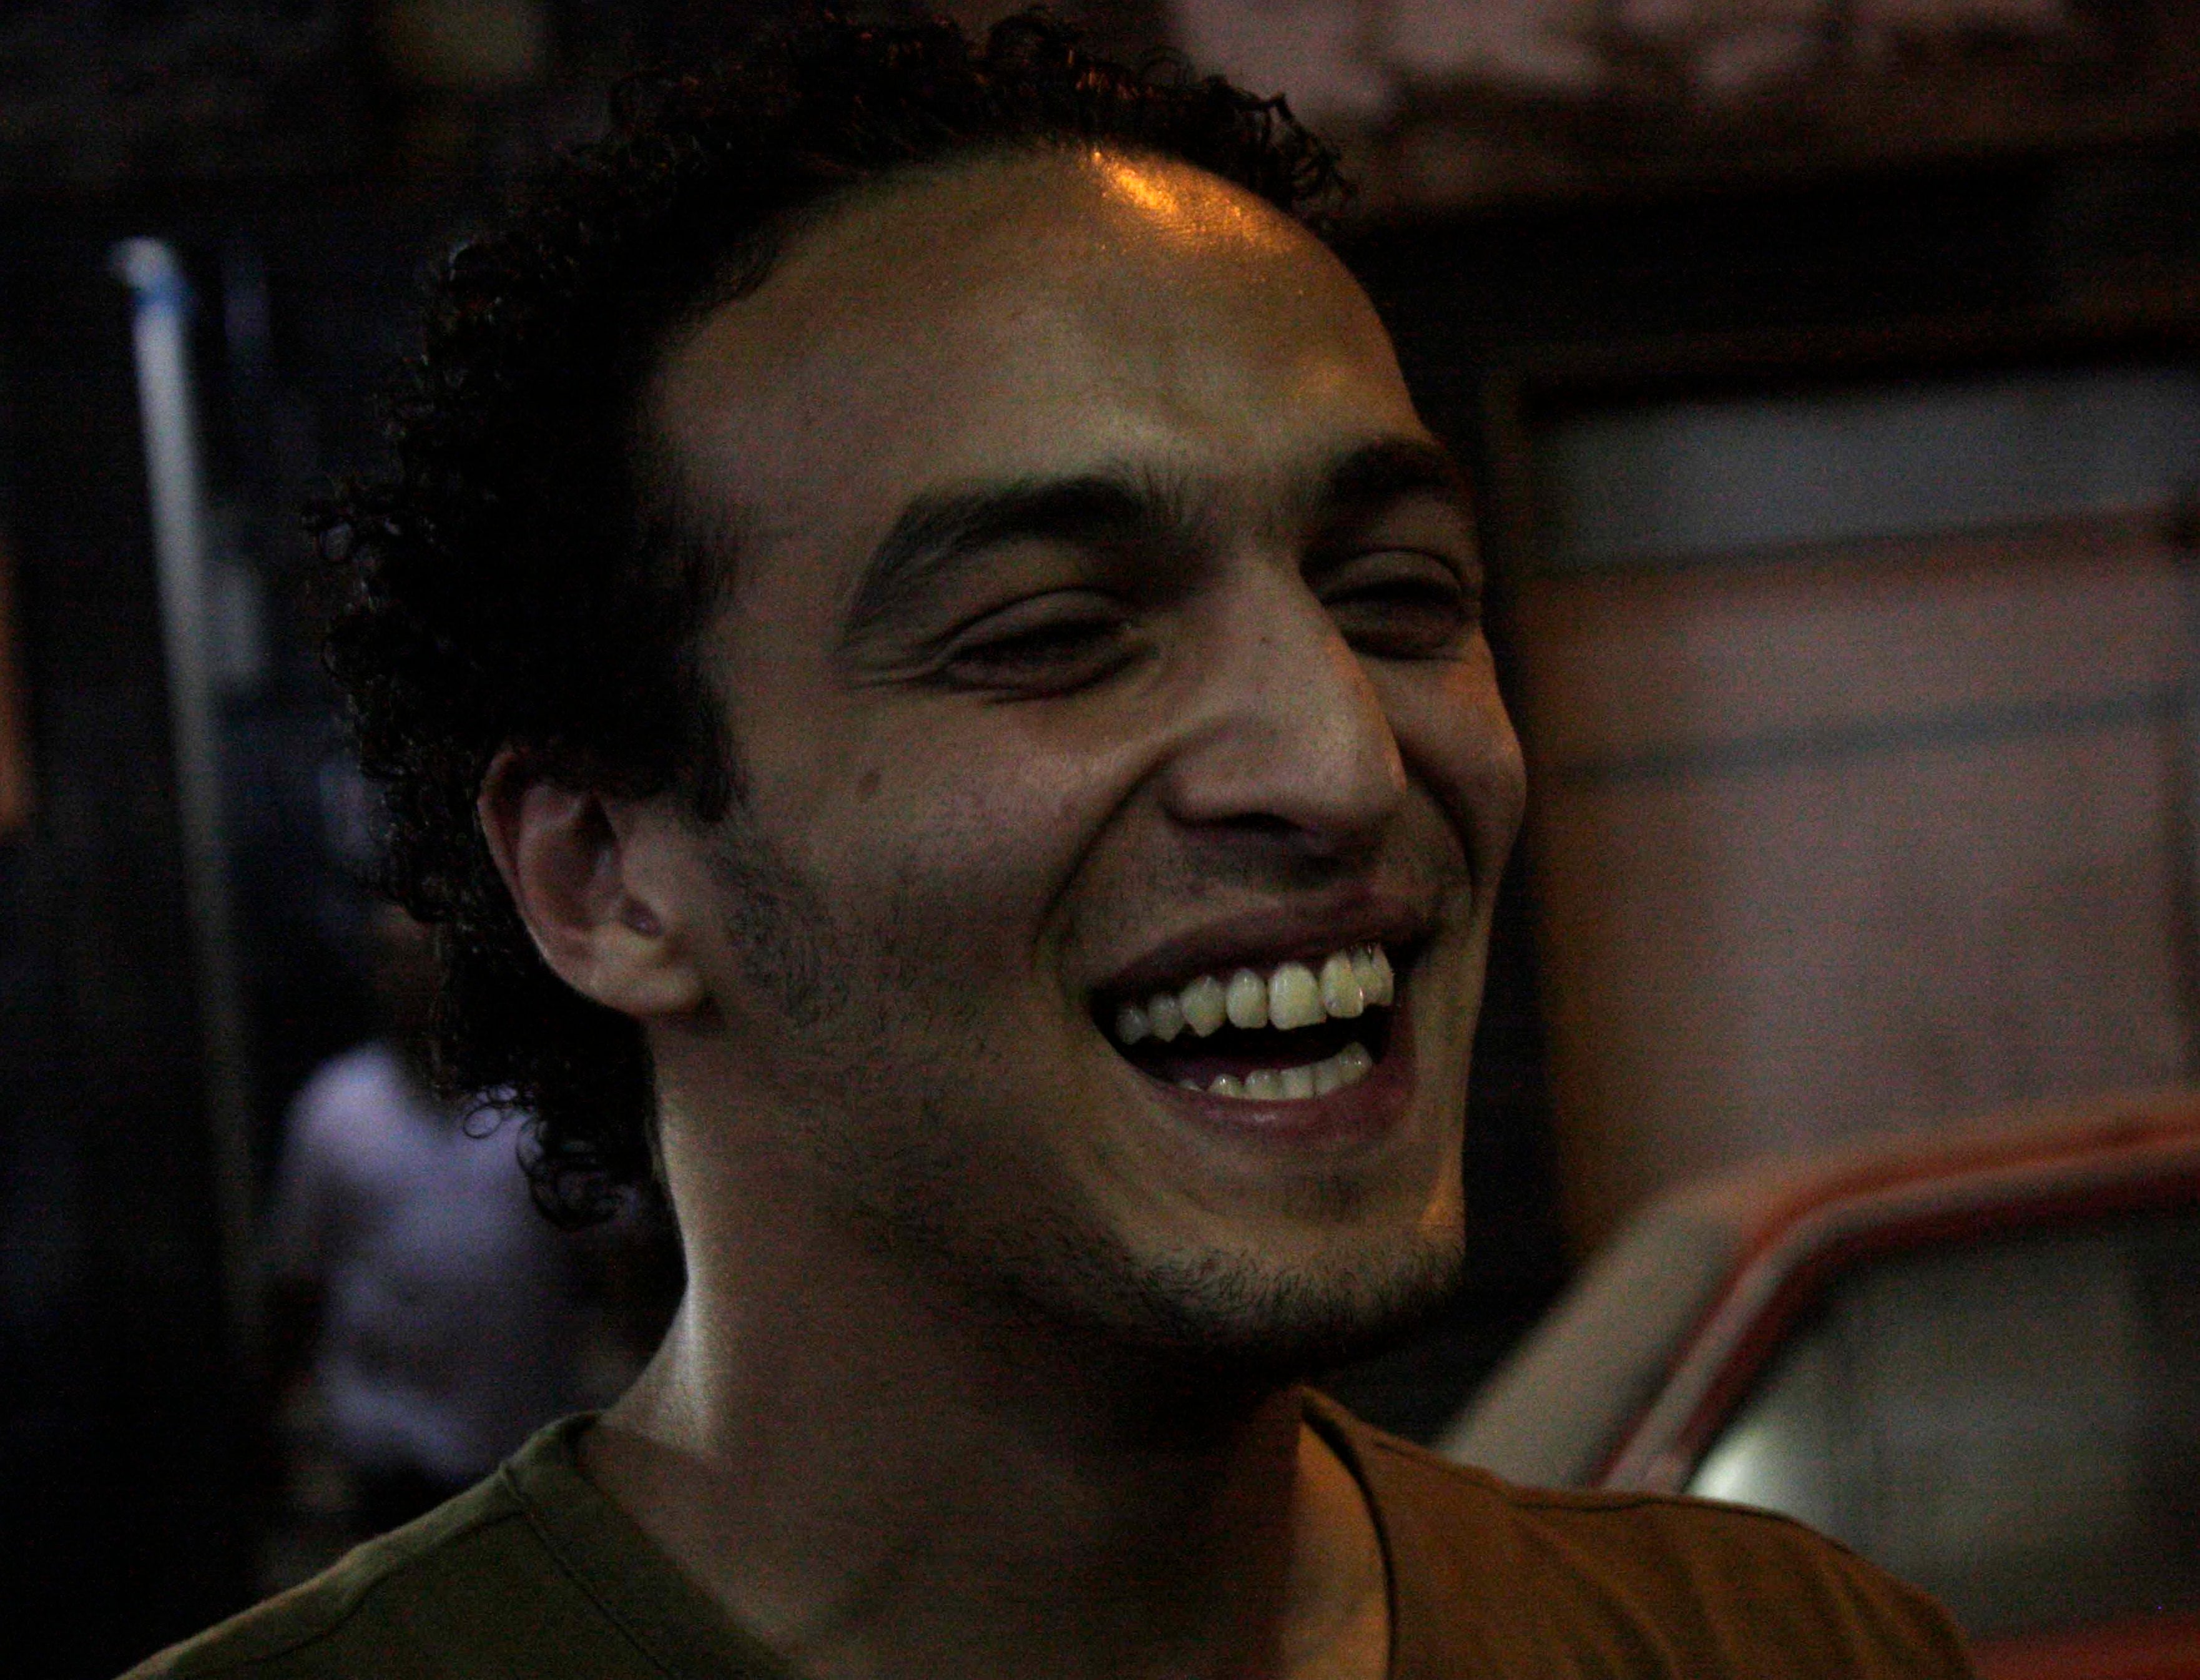 Charity calls for release of Egyptian photographer 'Shawkan' jailed for taking pictures of protest killings